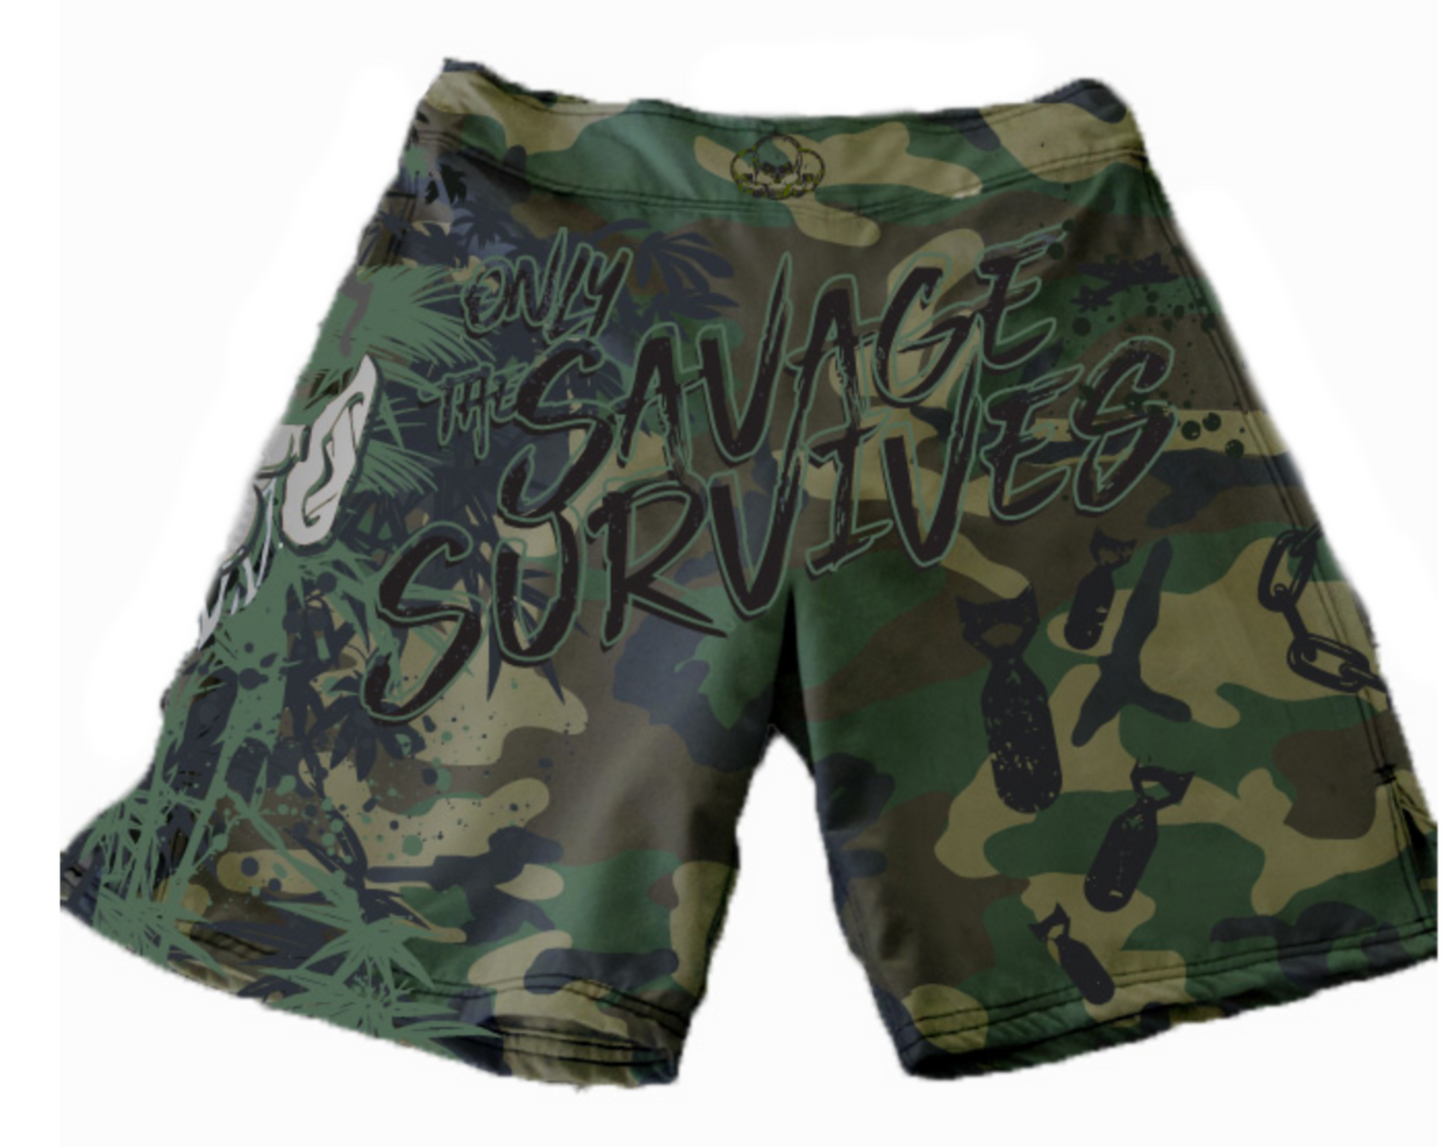 Camo Monkey Shorts Presale items Shipping To  Start December 5th Savage Fightwear